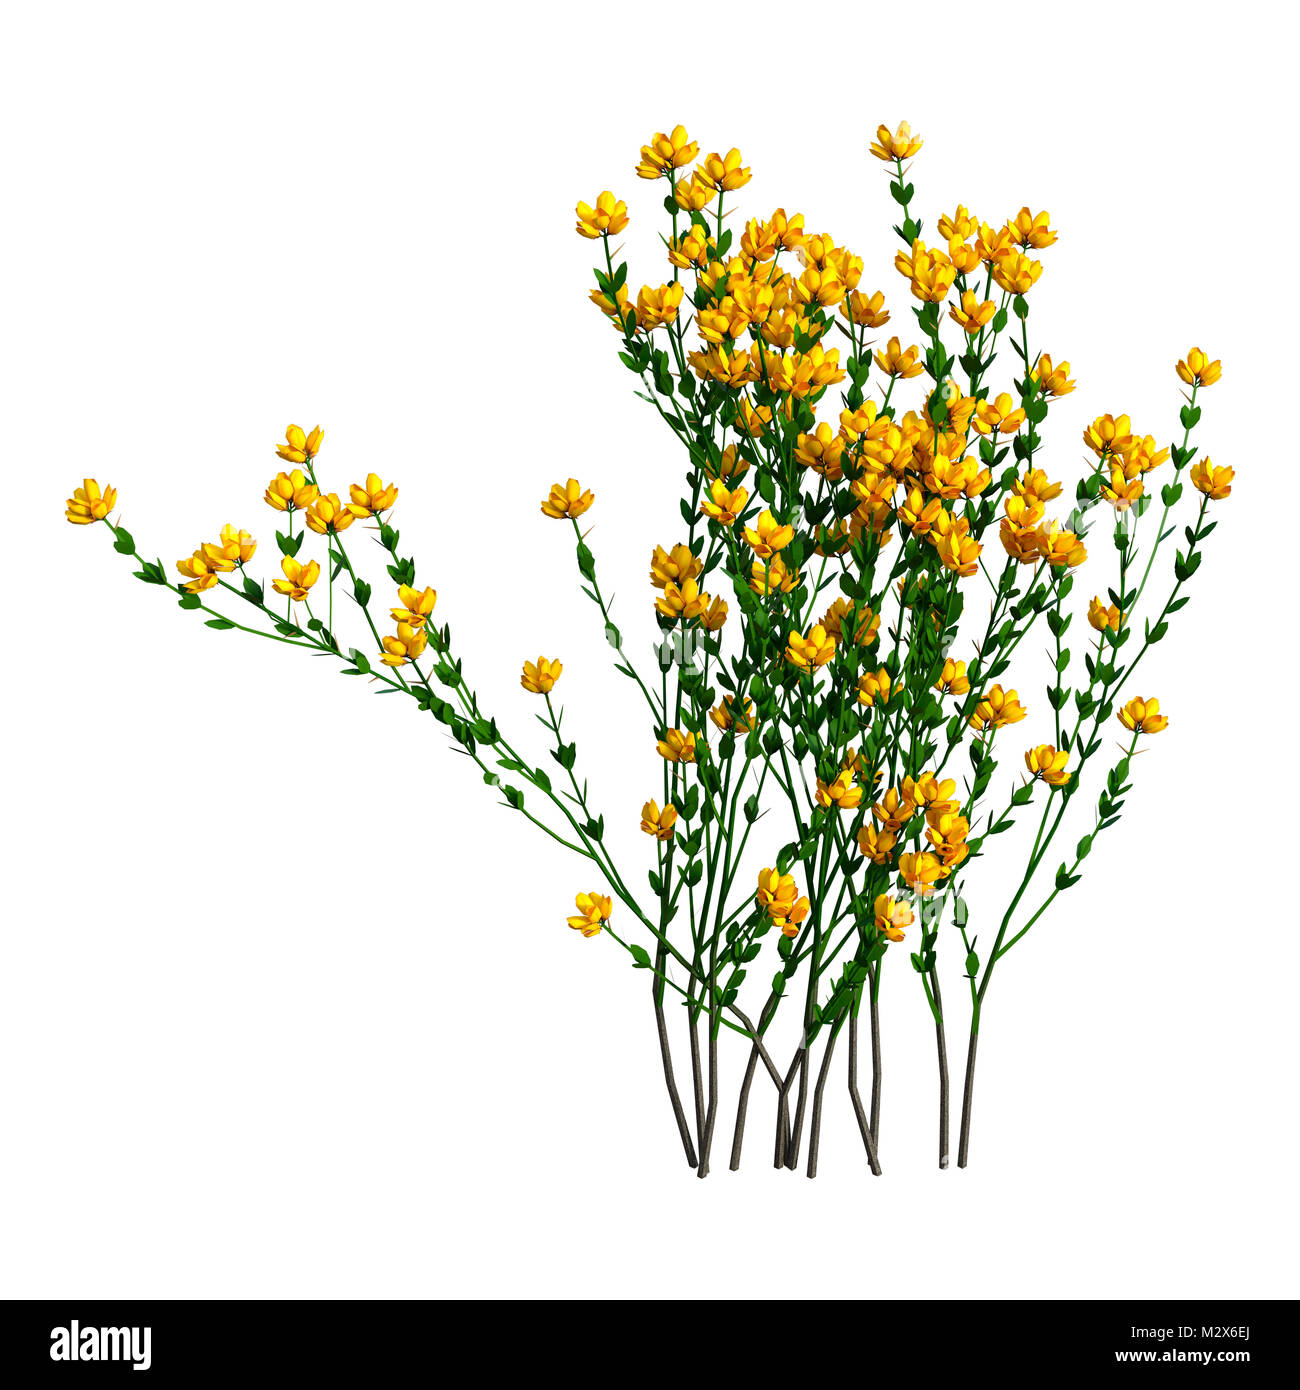 3D rendering of Genista hispanica flowers isolated on white background Stock Photo